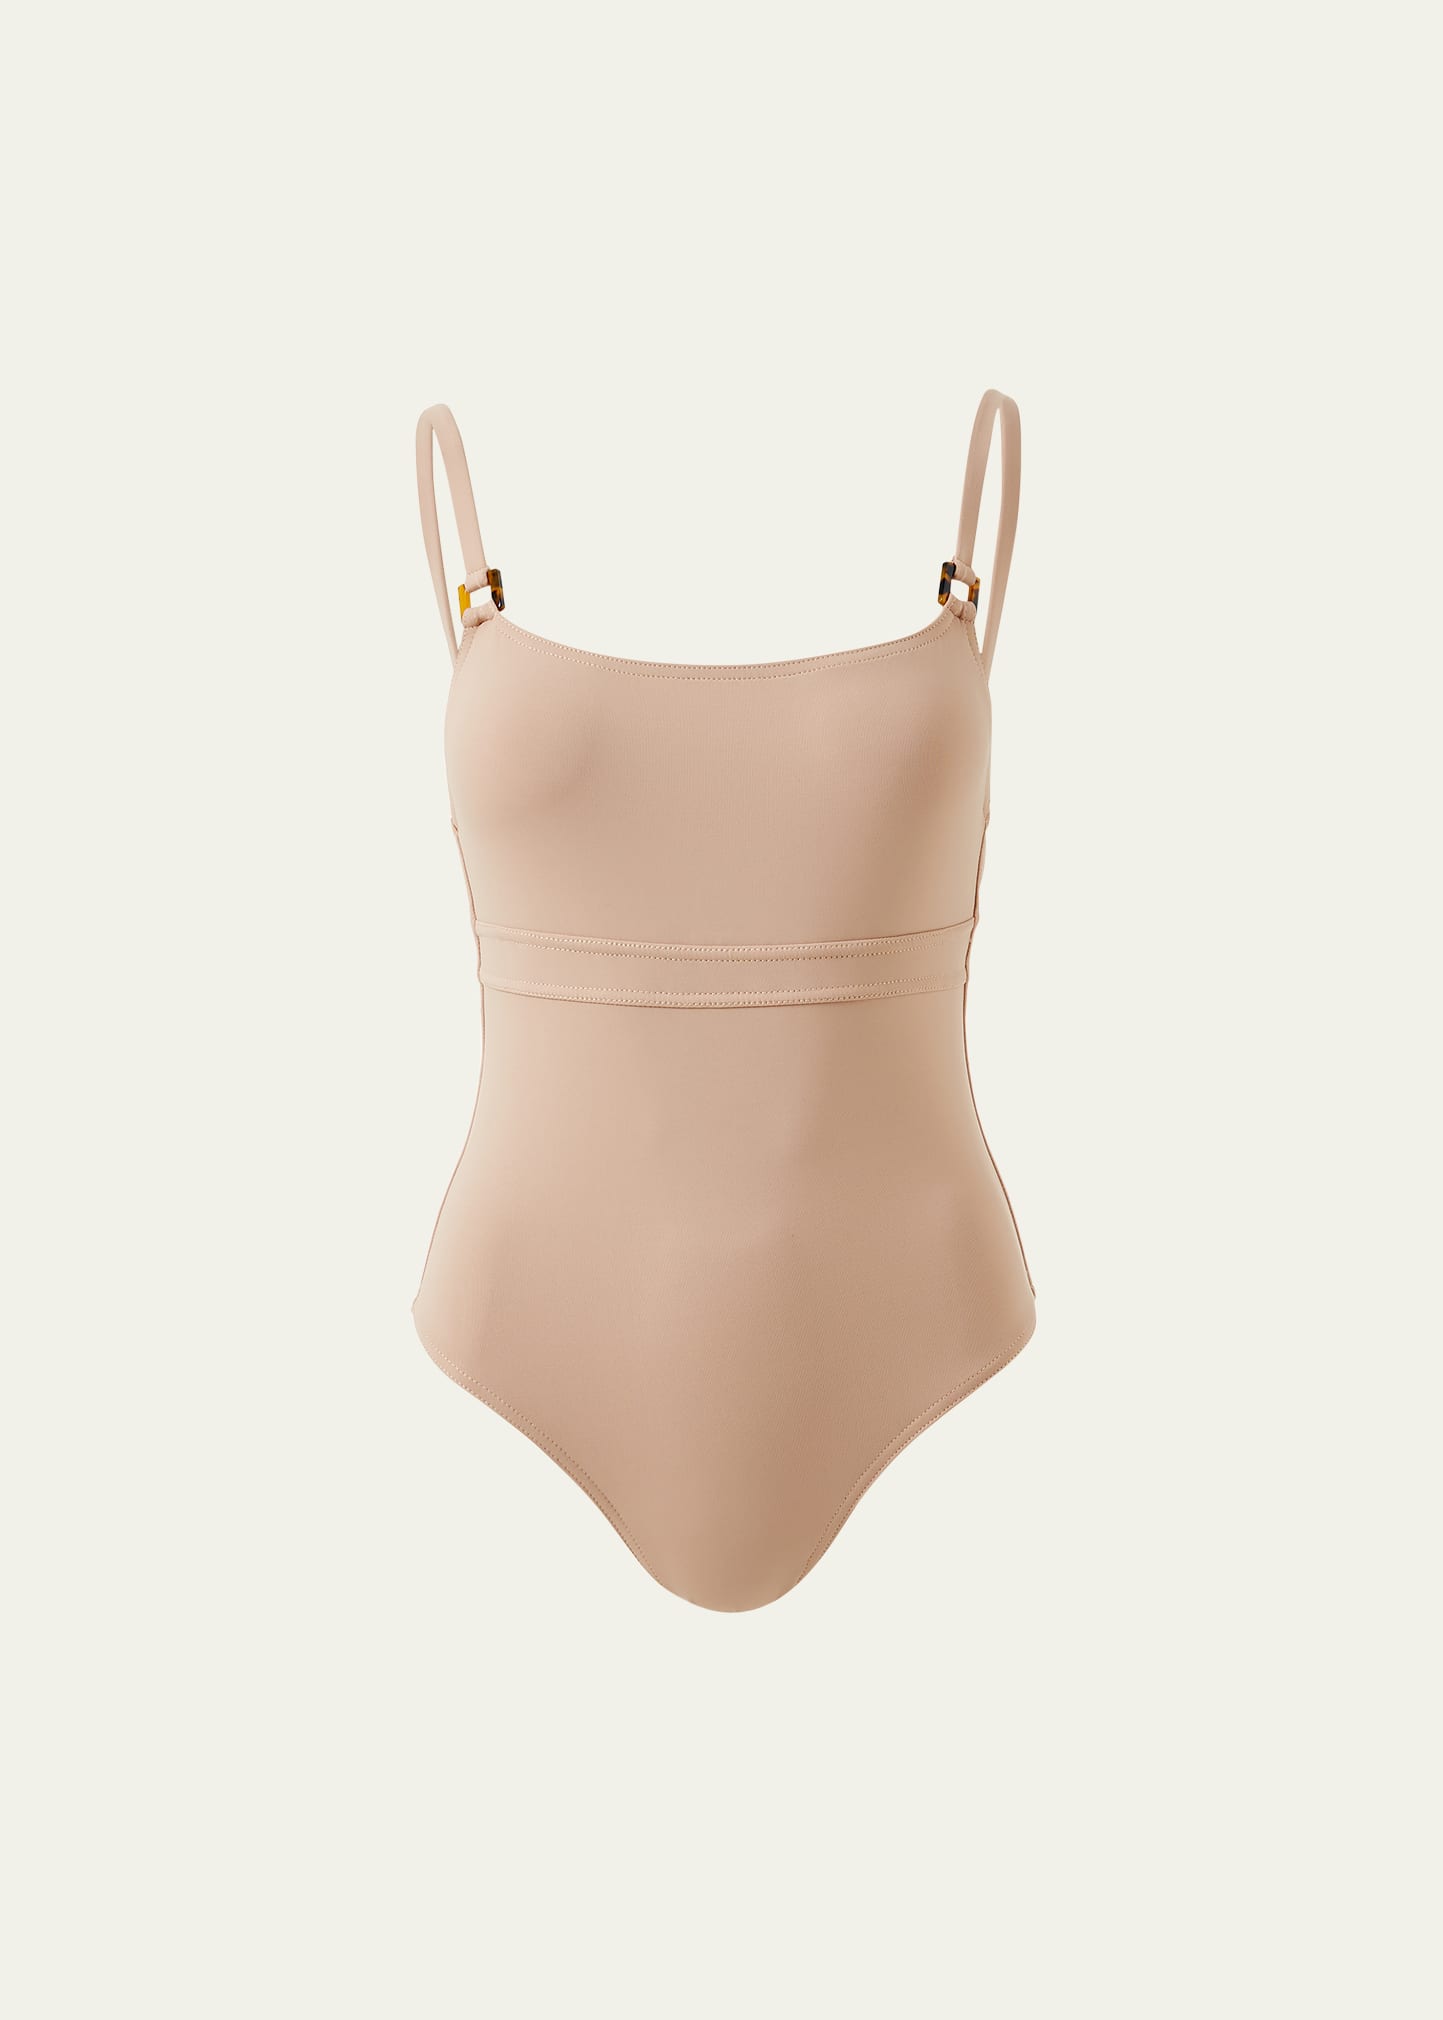 Melissa Odabash St Lucia One-piece Swimsuit In Tan